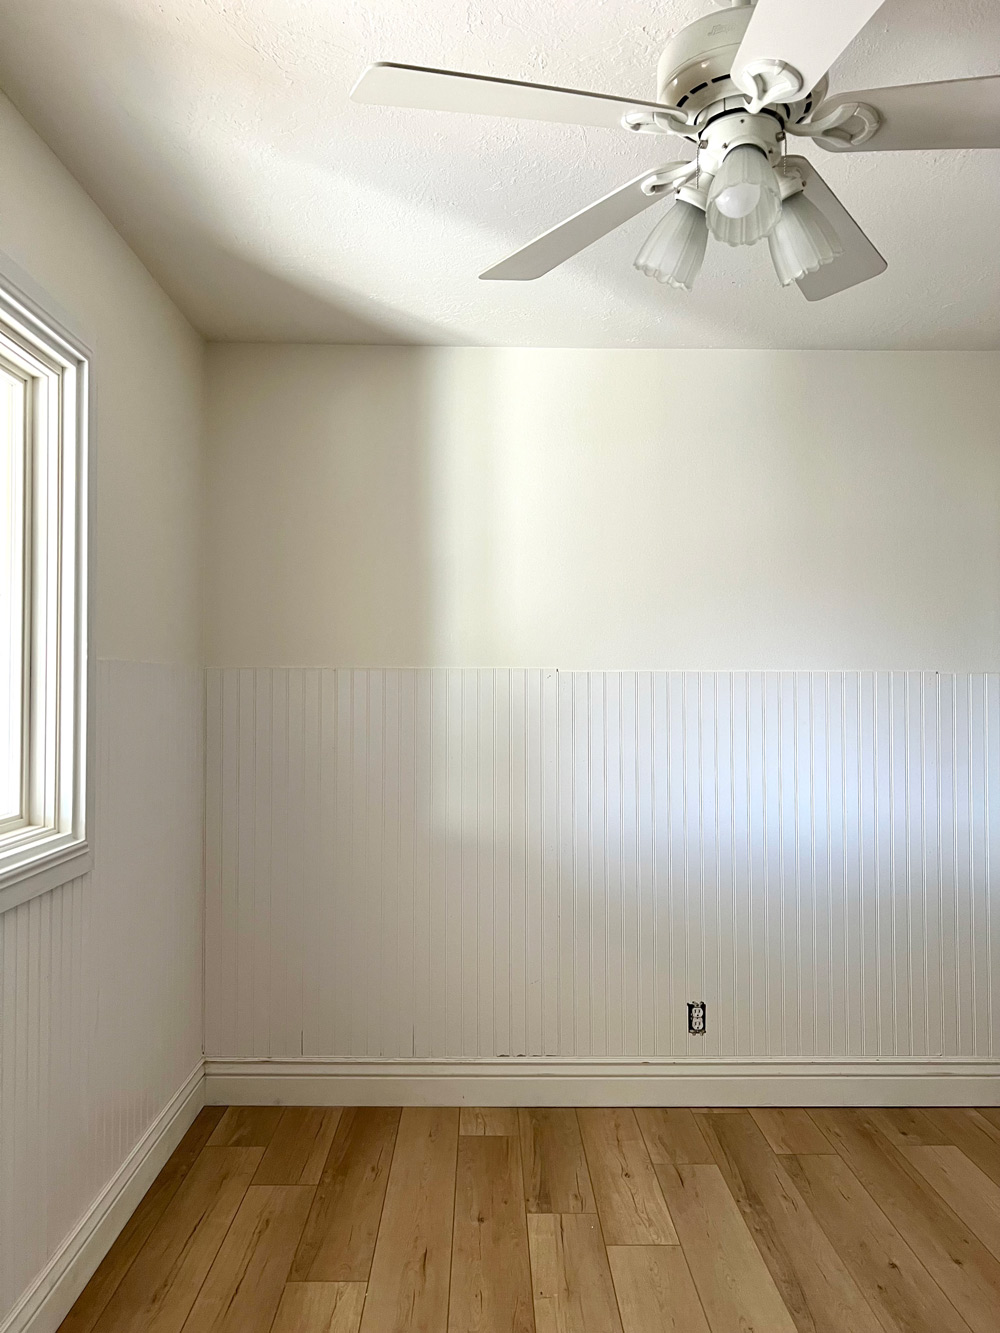 Corner of a beige room with white beadboard and ceiling fan.